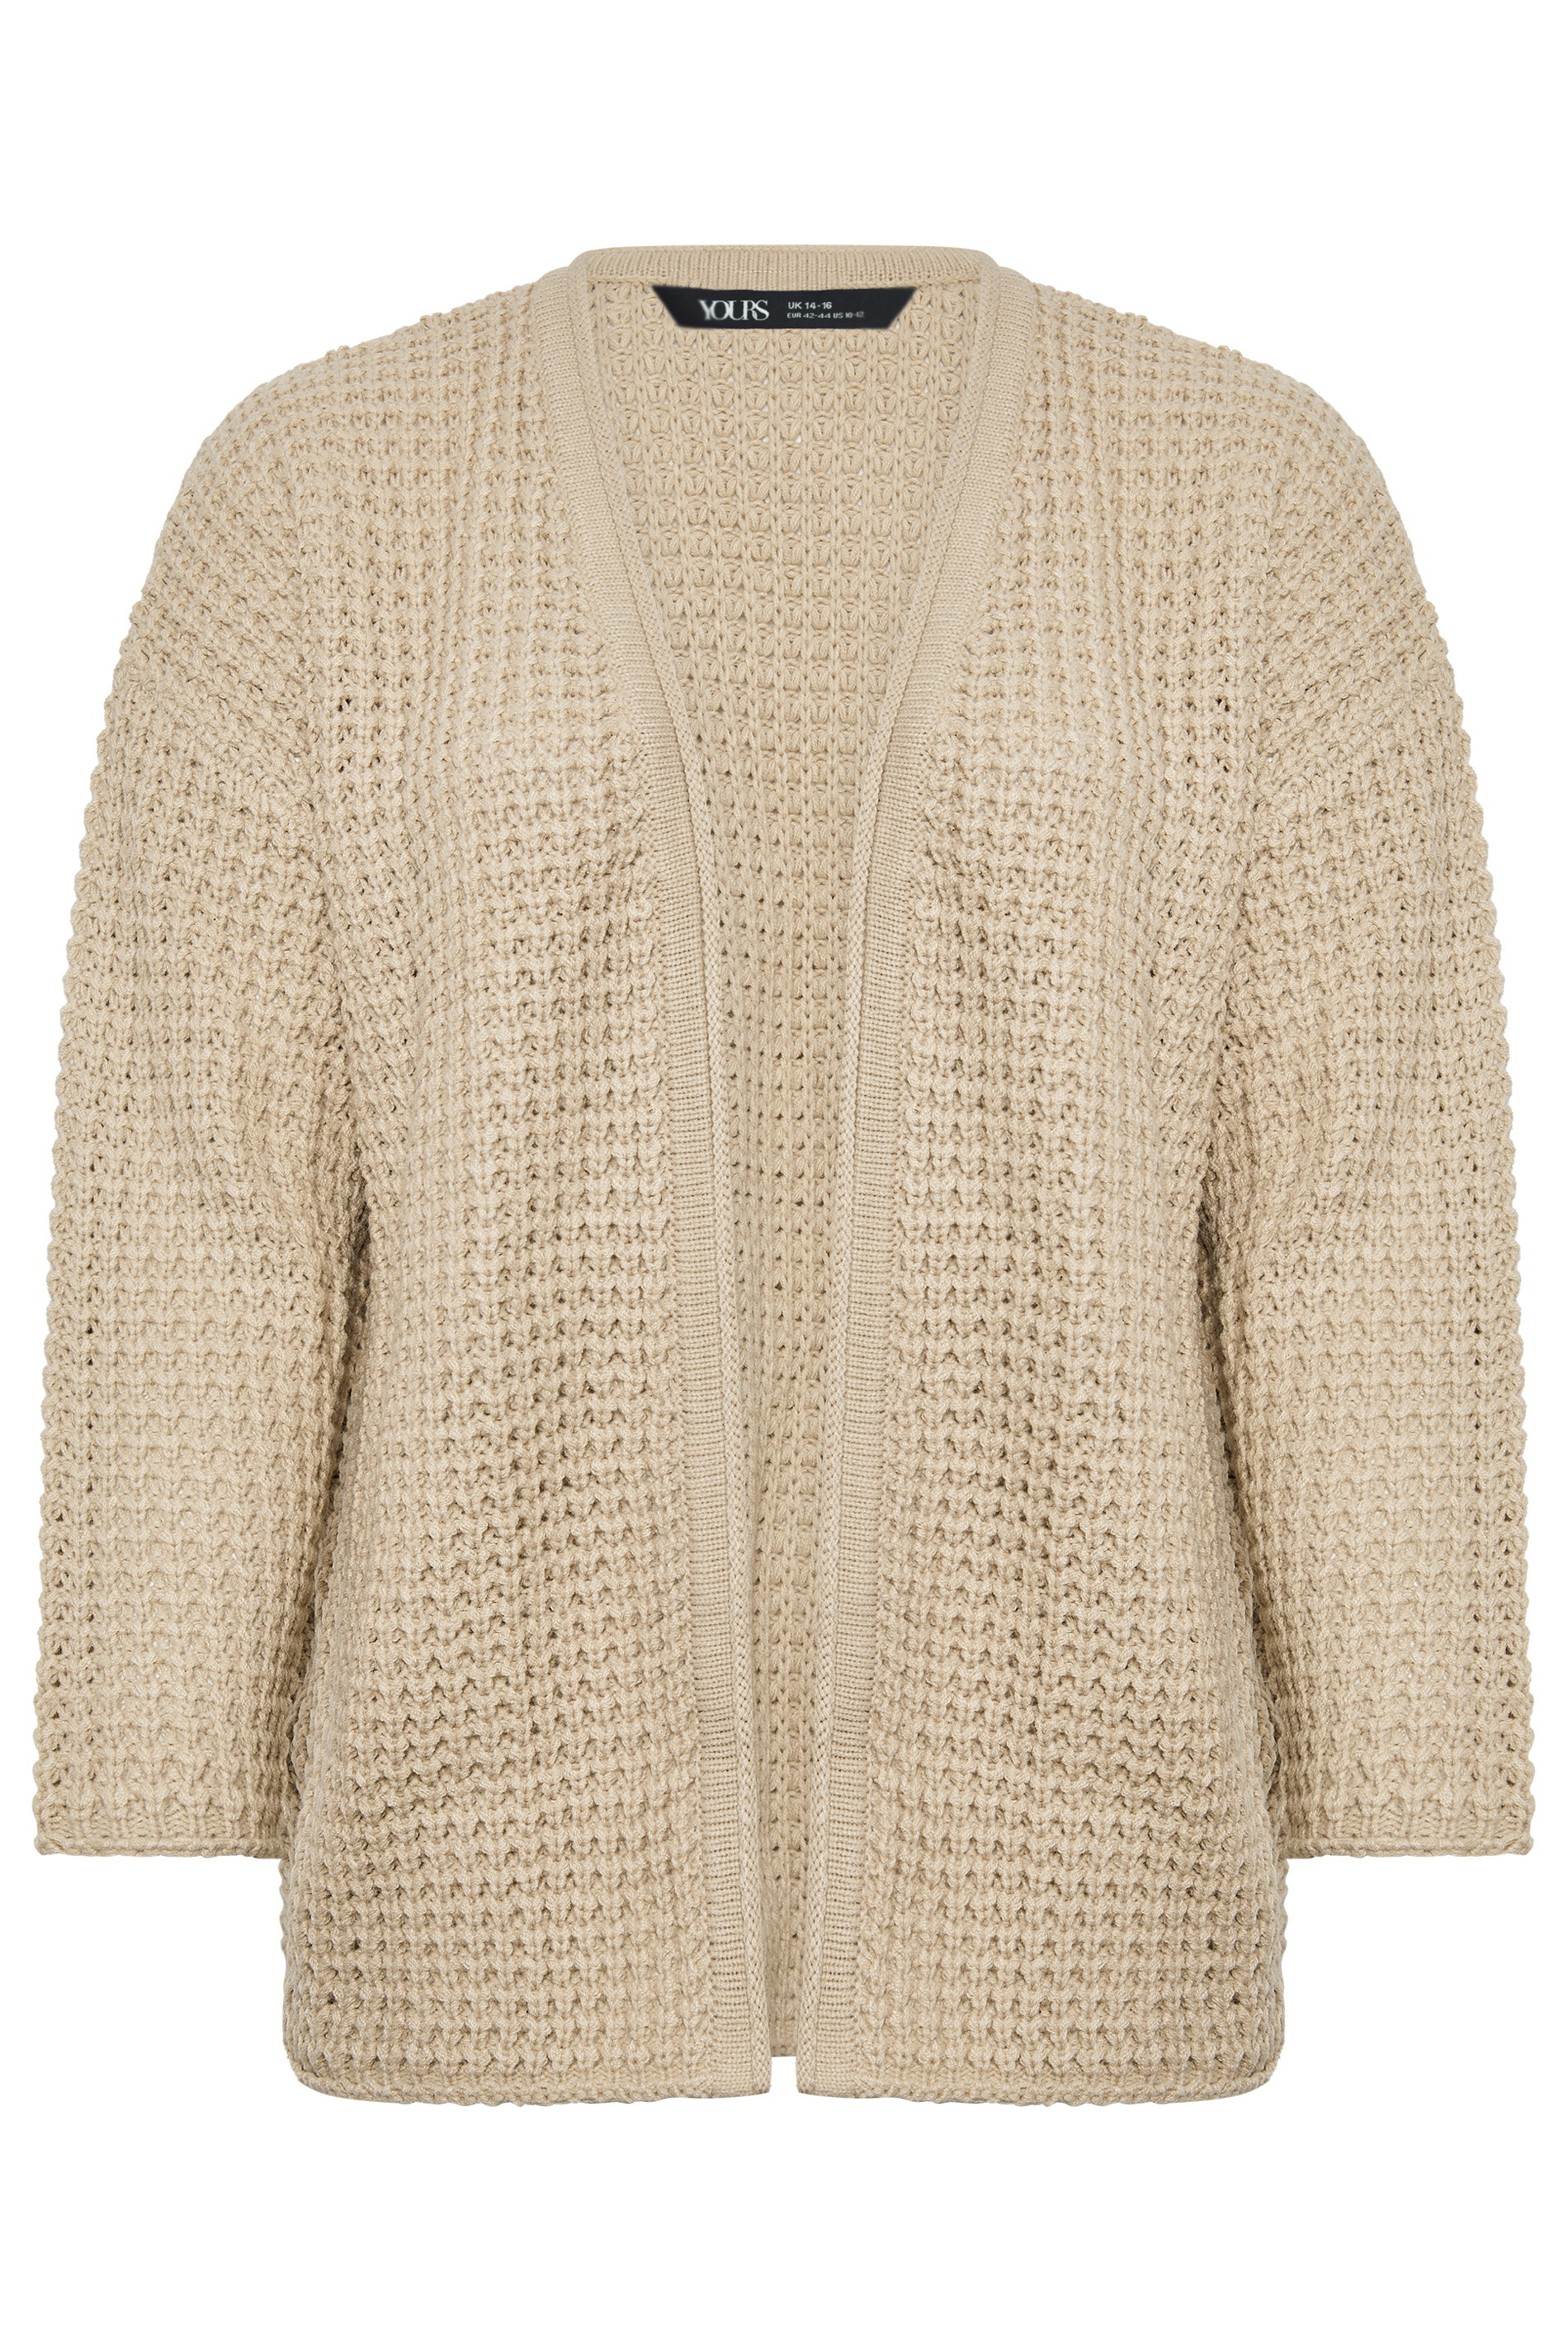 YOURS Plus Size Nude Beige Knitted Button Through Cardigan